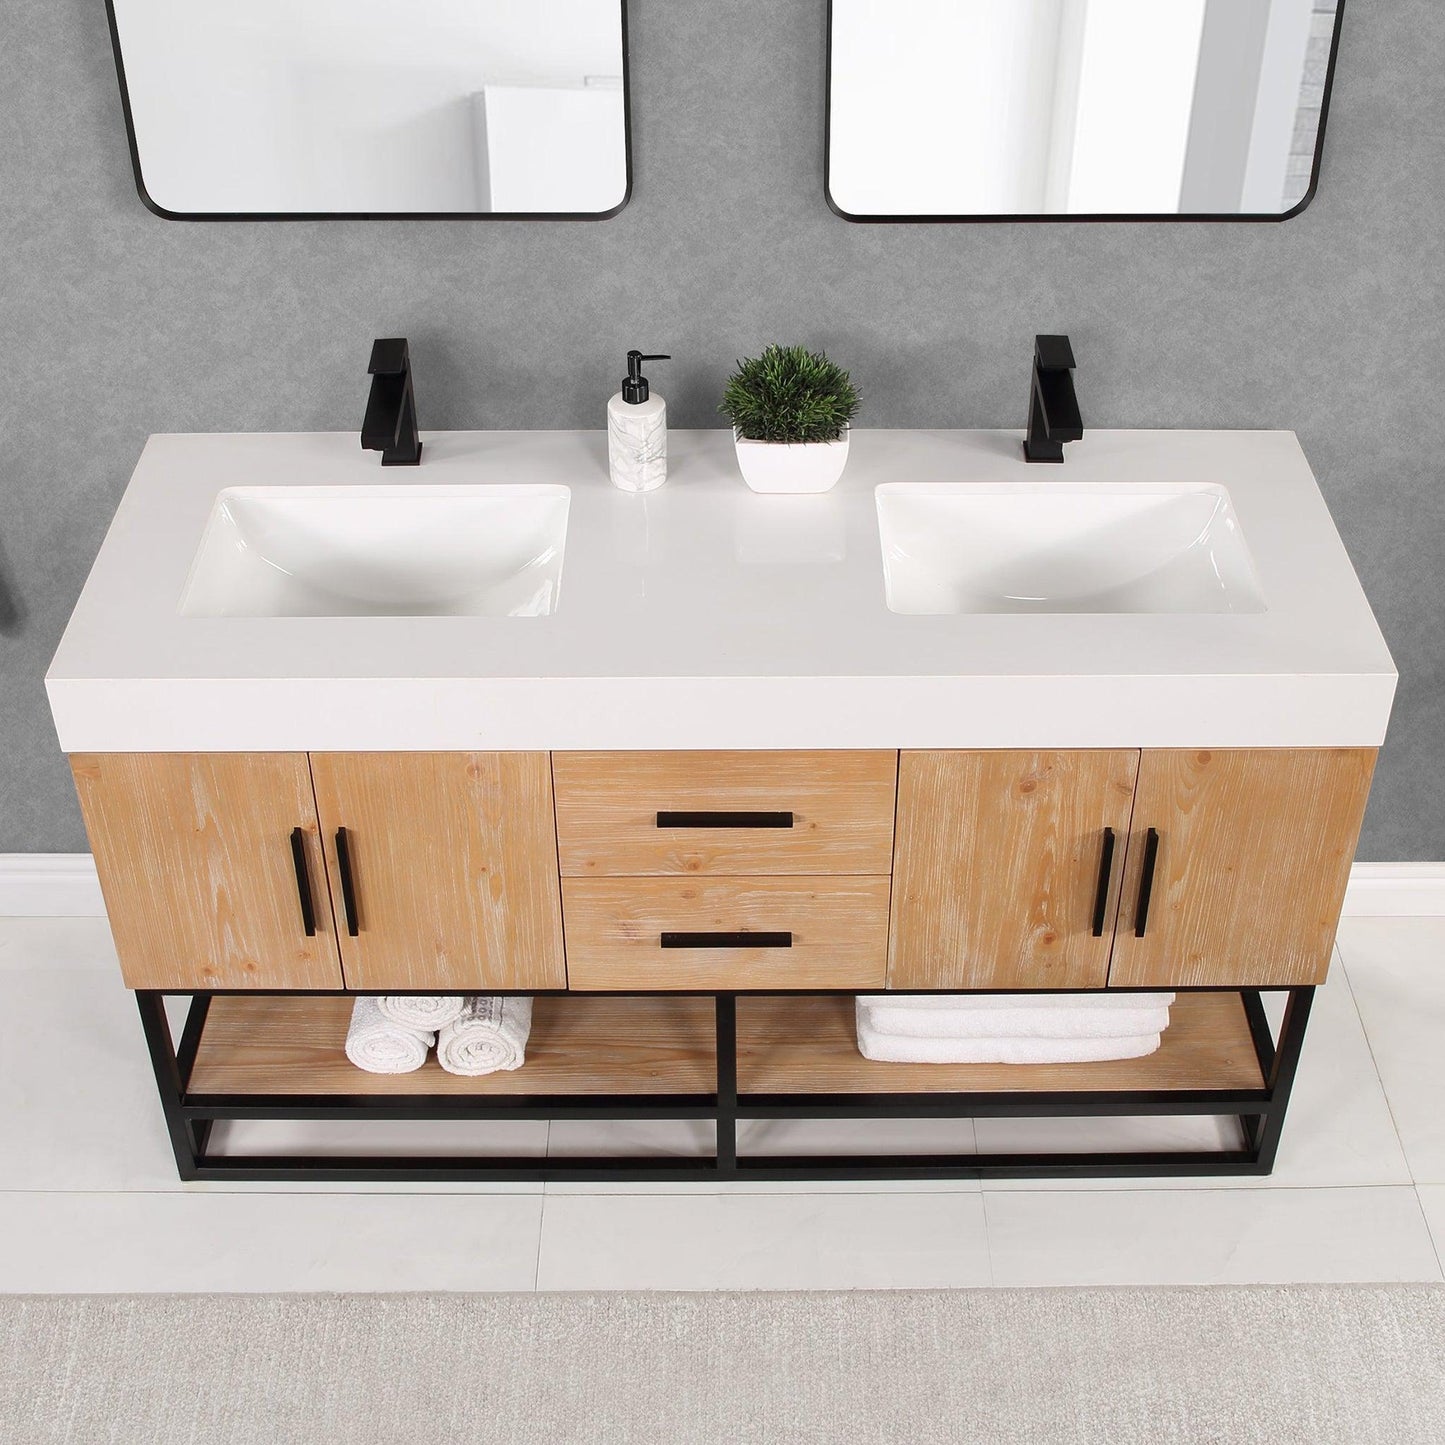 Altair Bianco 60" Light Brown Freestanding Double Bathroom Vanity Set With Matte Black Support Base, White Composite Stone Top, Two Rectangular Undermount Ceramic Sinks, and Overflow